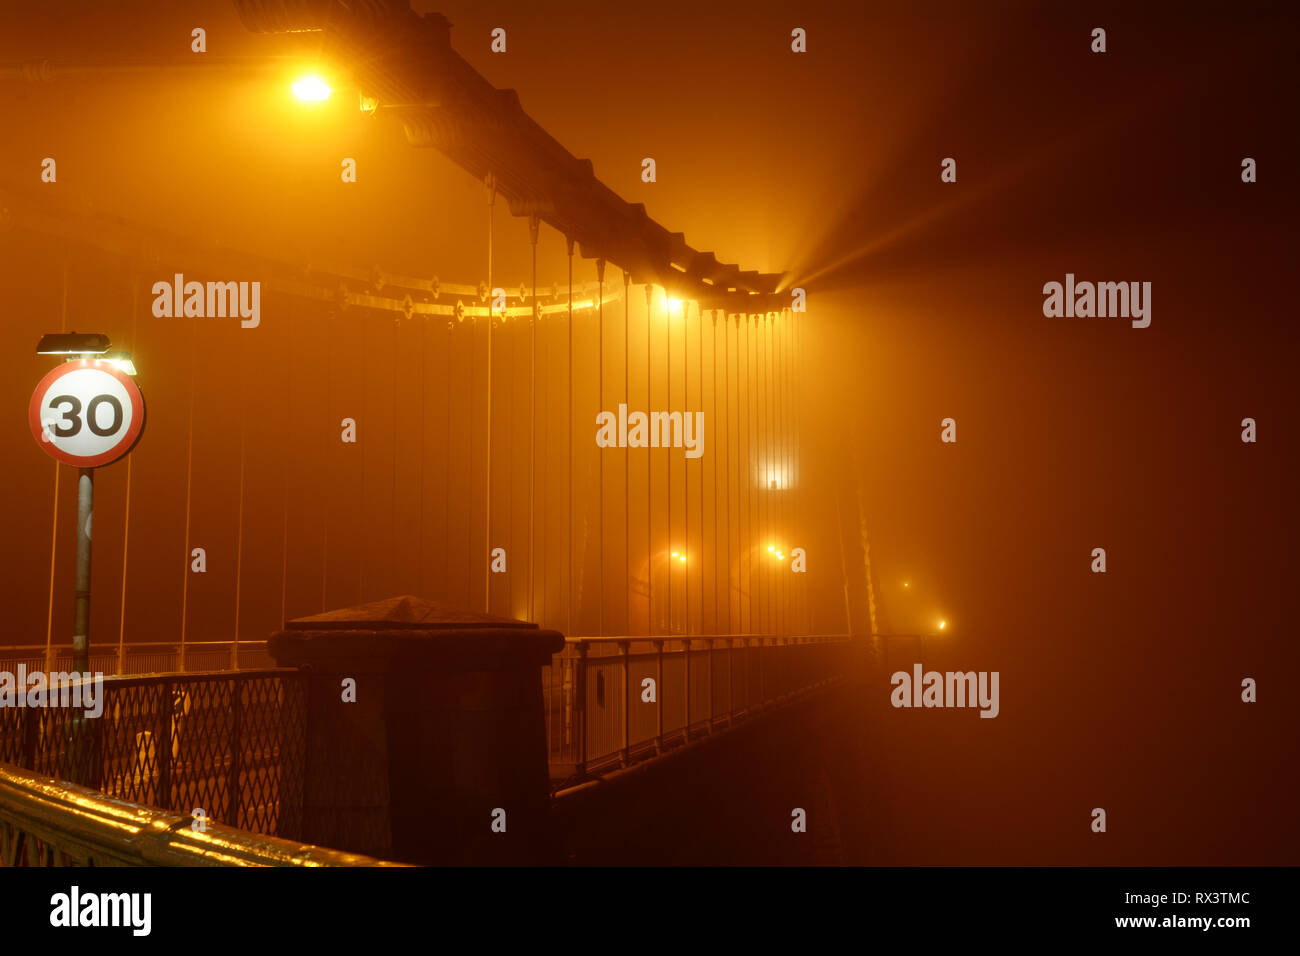 Misty and Foggy Menai Suspension Bridge at night time. This bridge joins the Welsh mainland with the beautiful Isle of Anglesey. Stock Photo